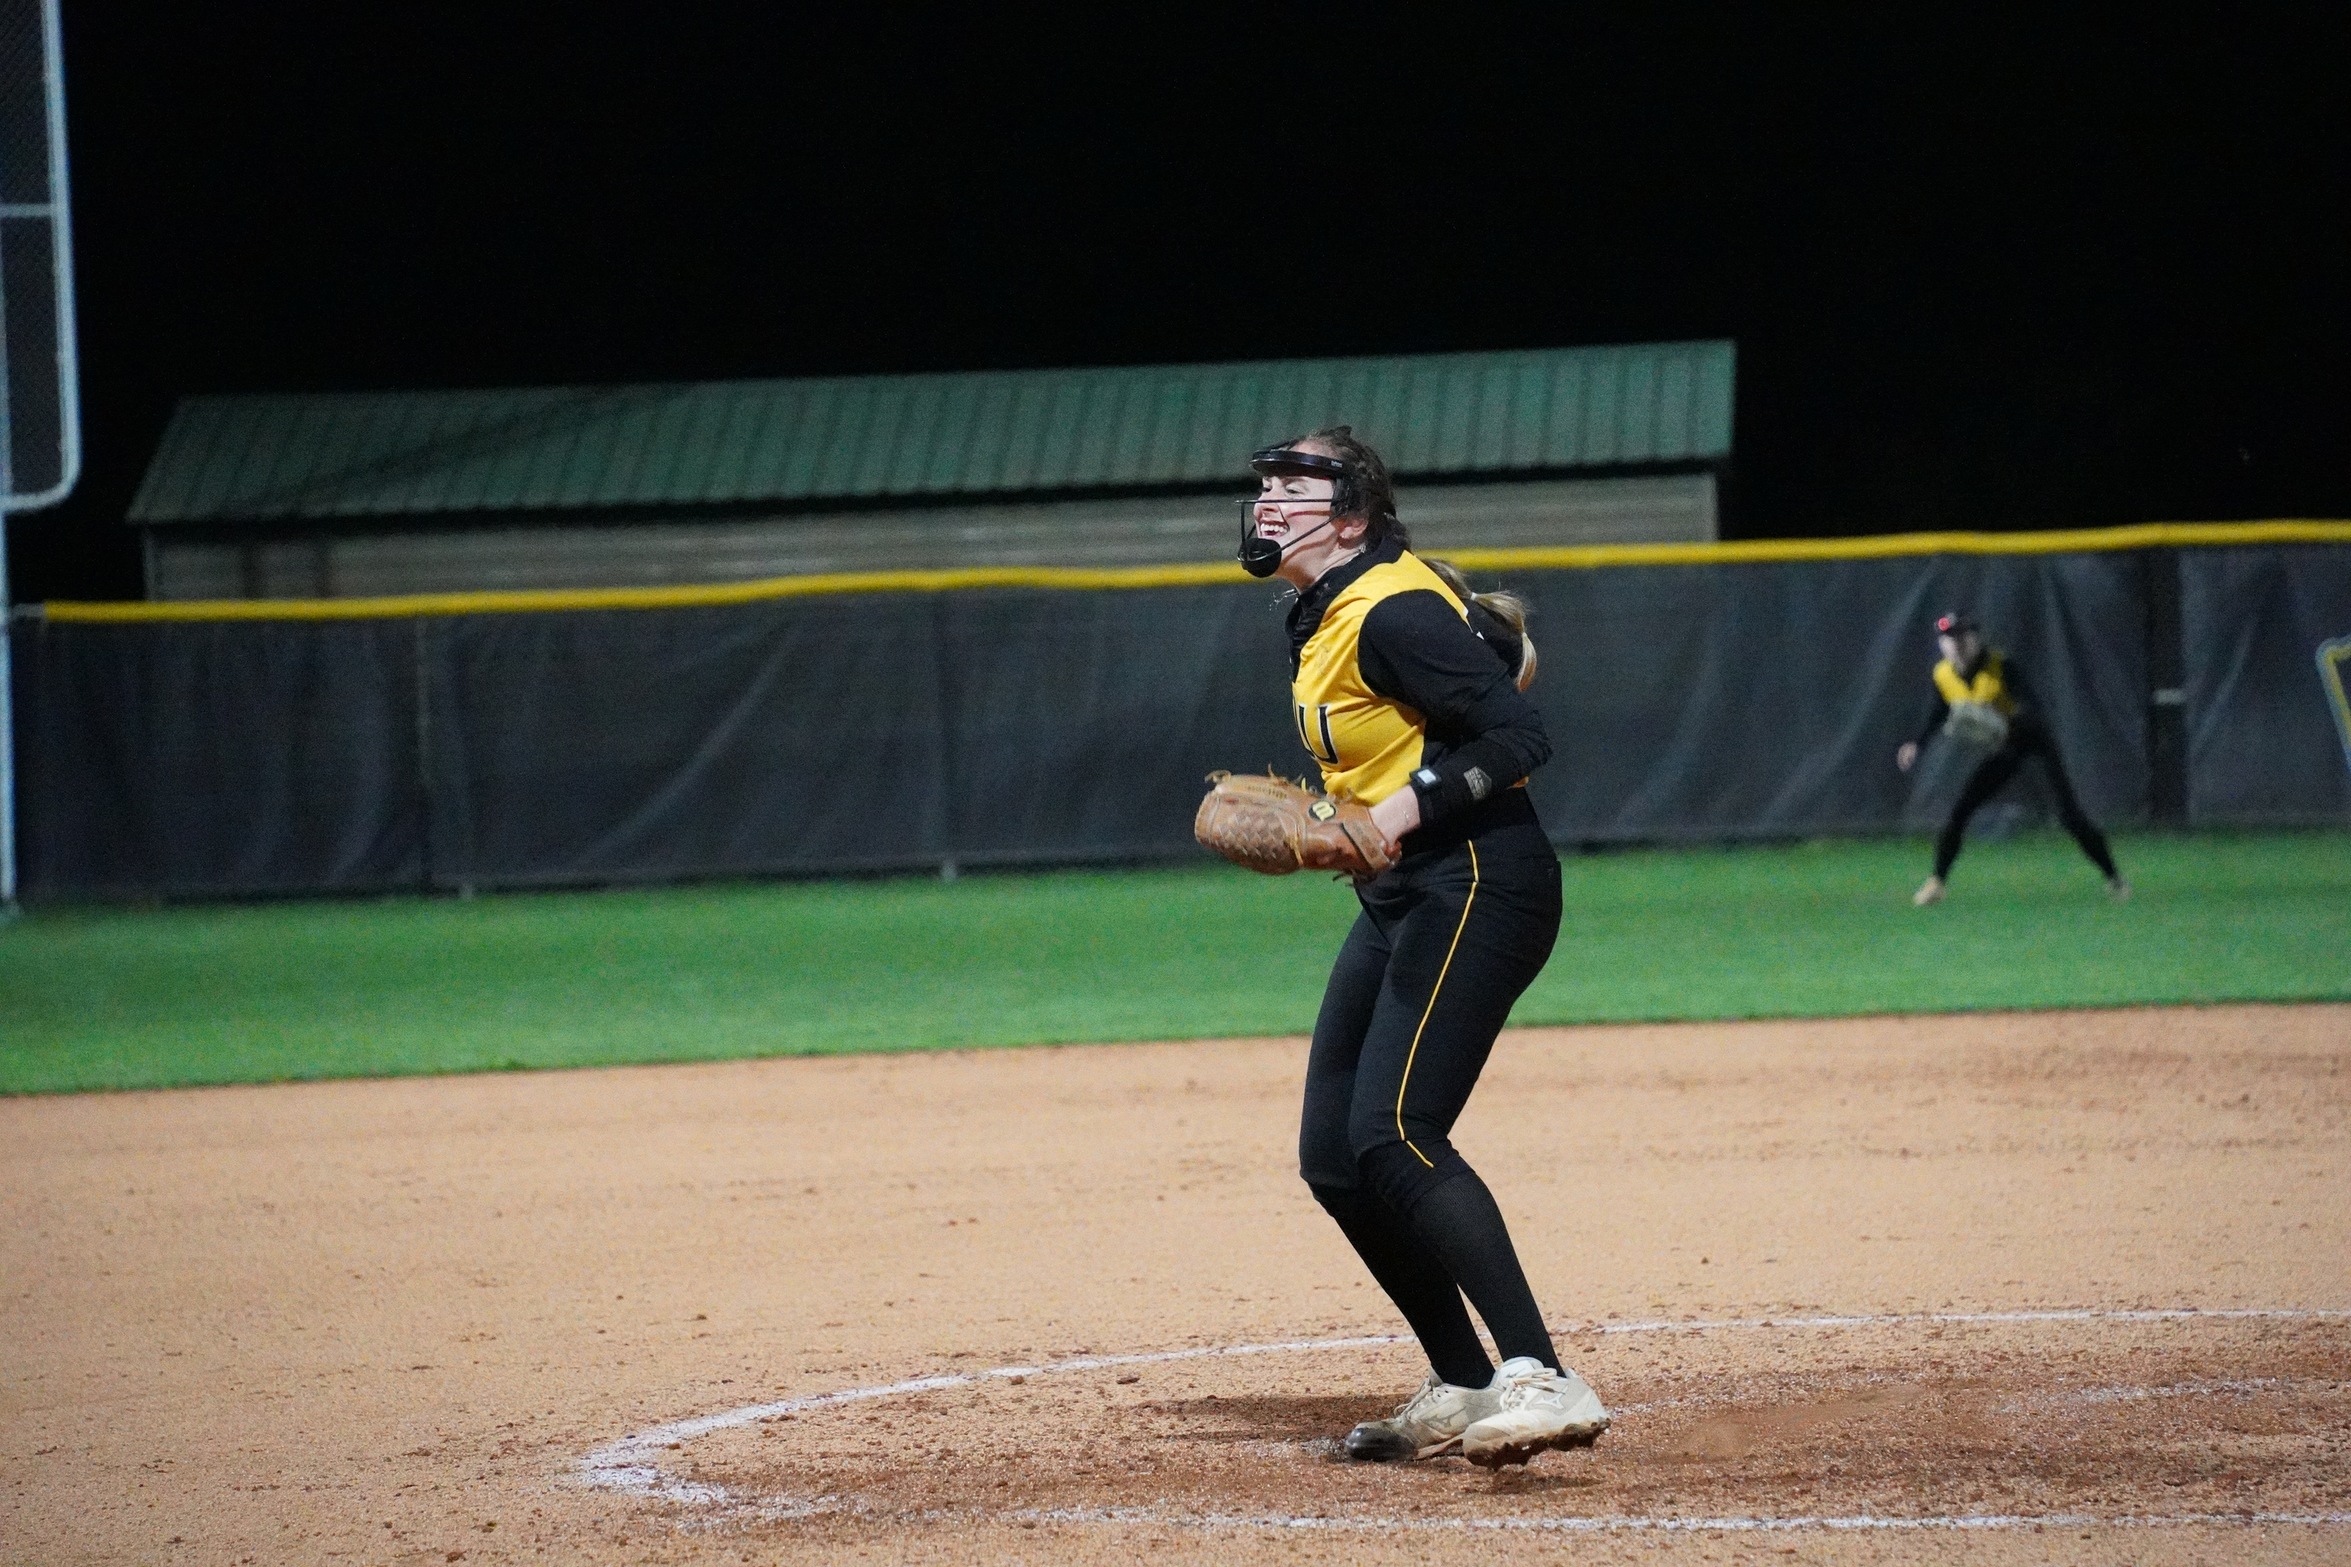 Ashlyn Strother celebrates after a strikeout (photo by Bryce Hayes)